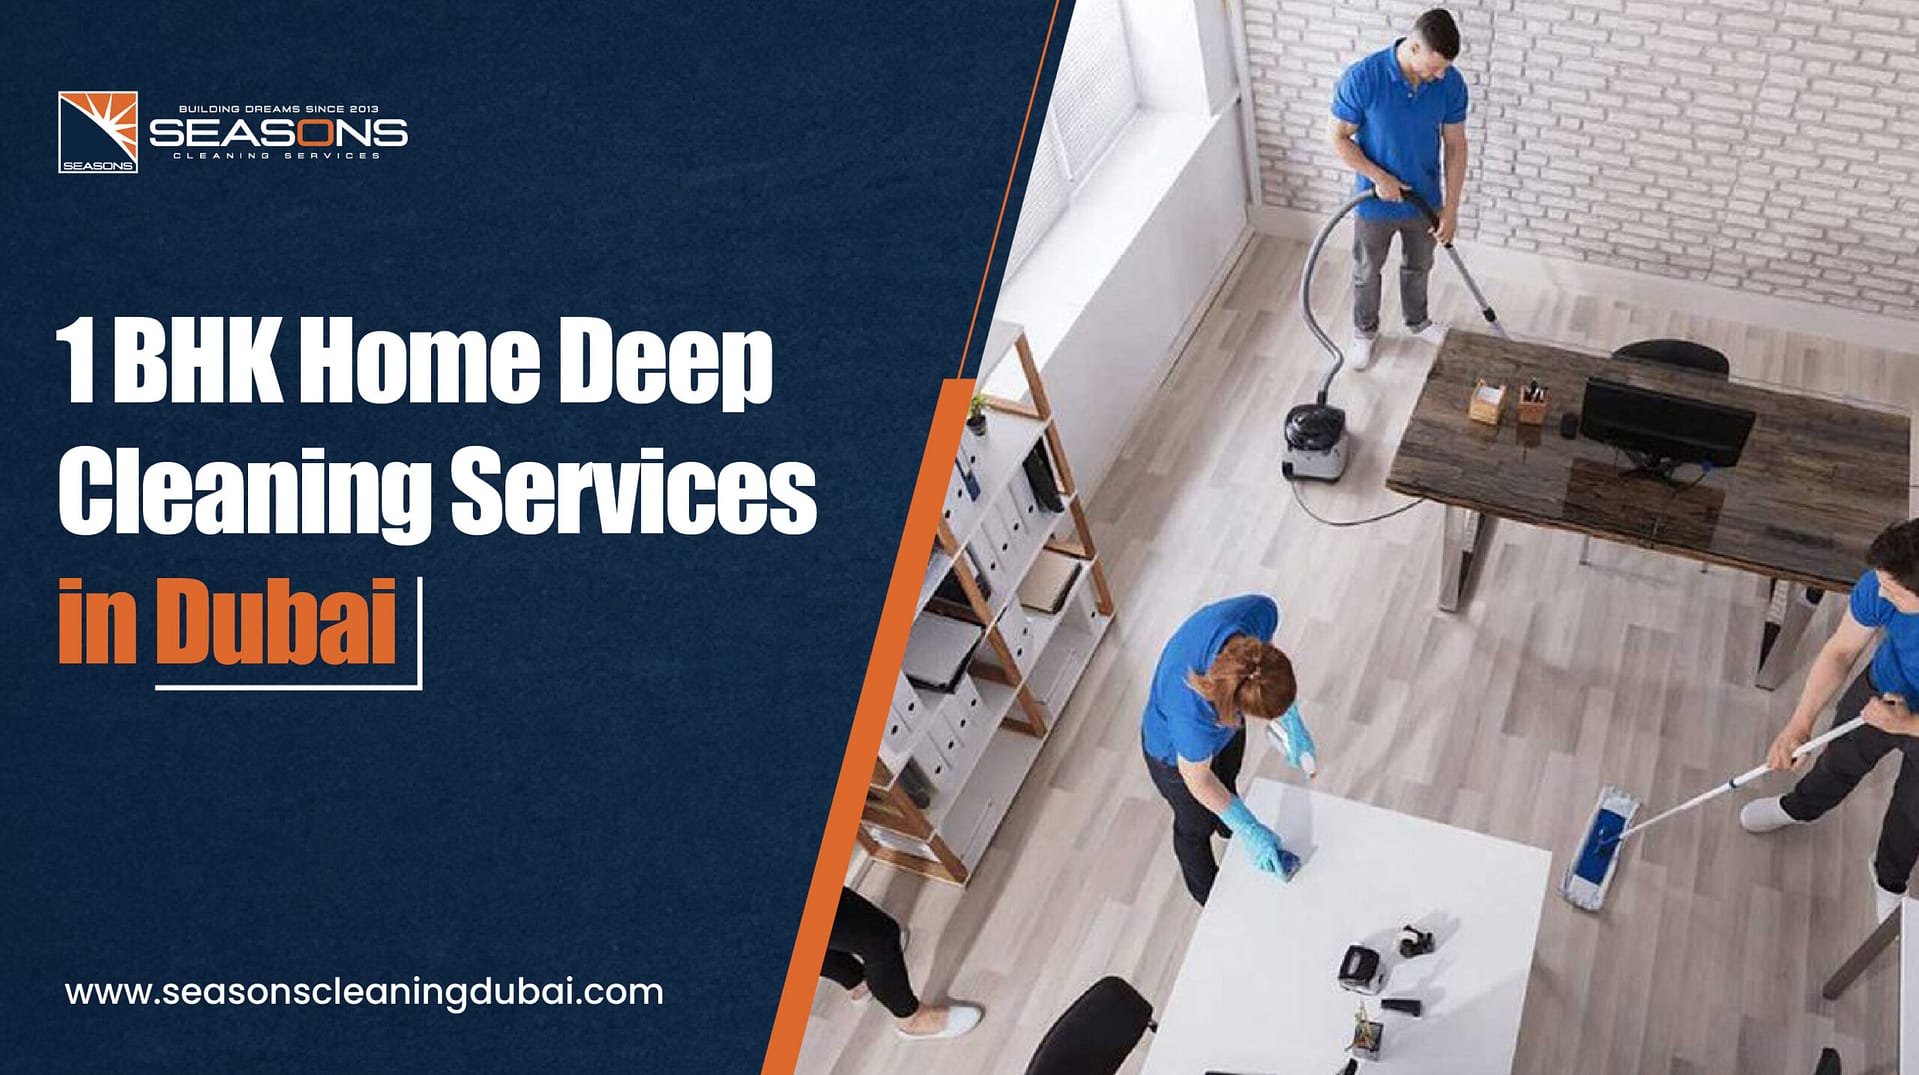 Home Deep Cleaning Services in Dubai